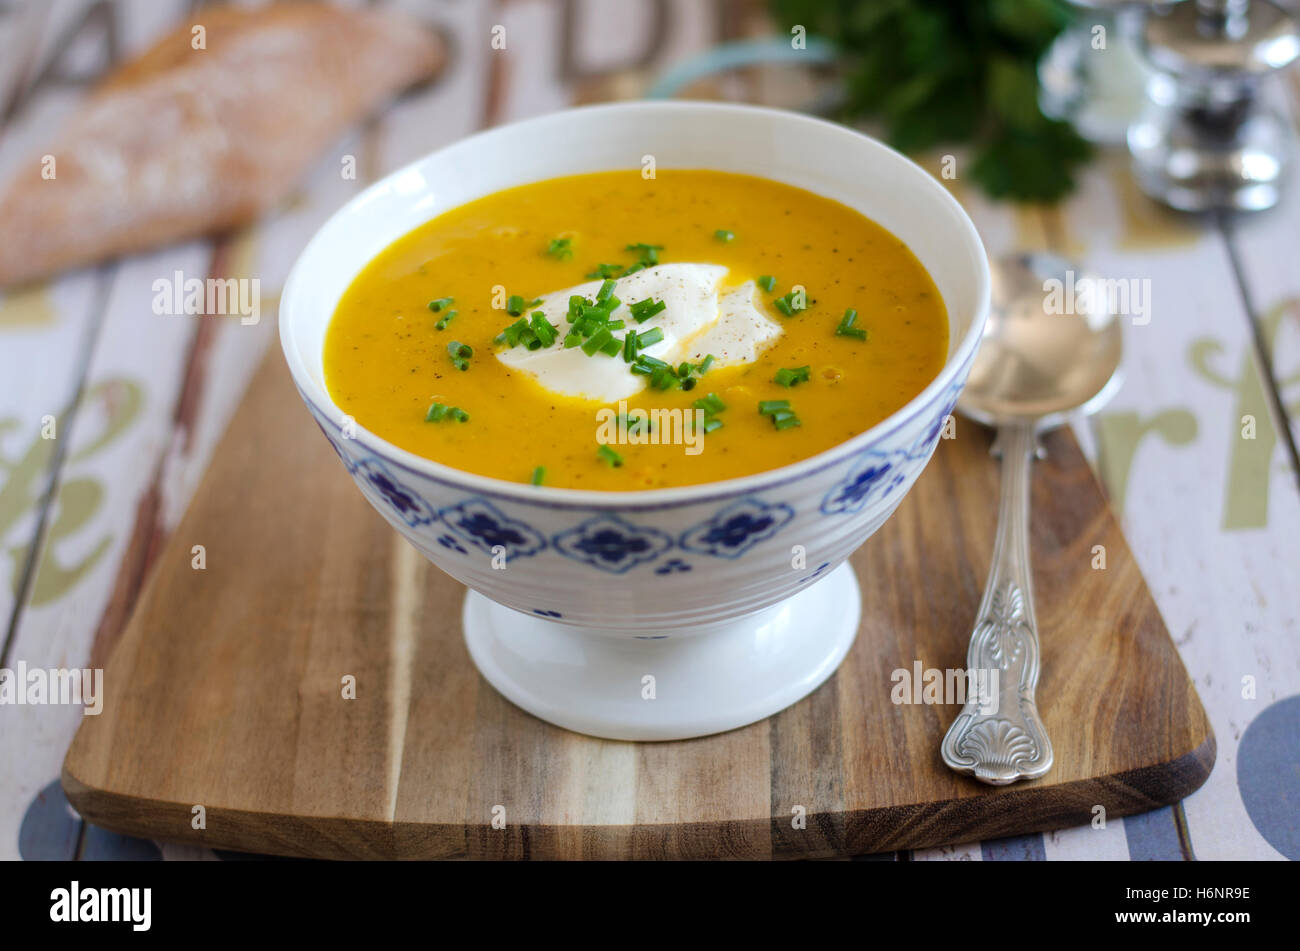 A bowl of vegetable soup with creme fraiche and chives Stock Photo